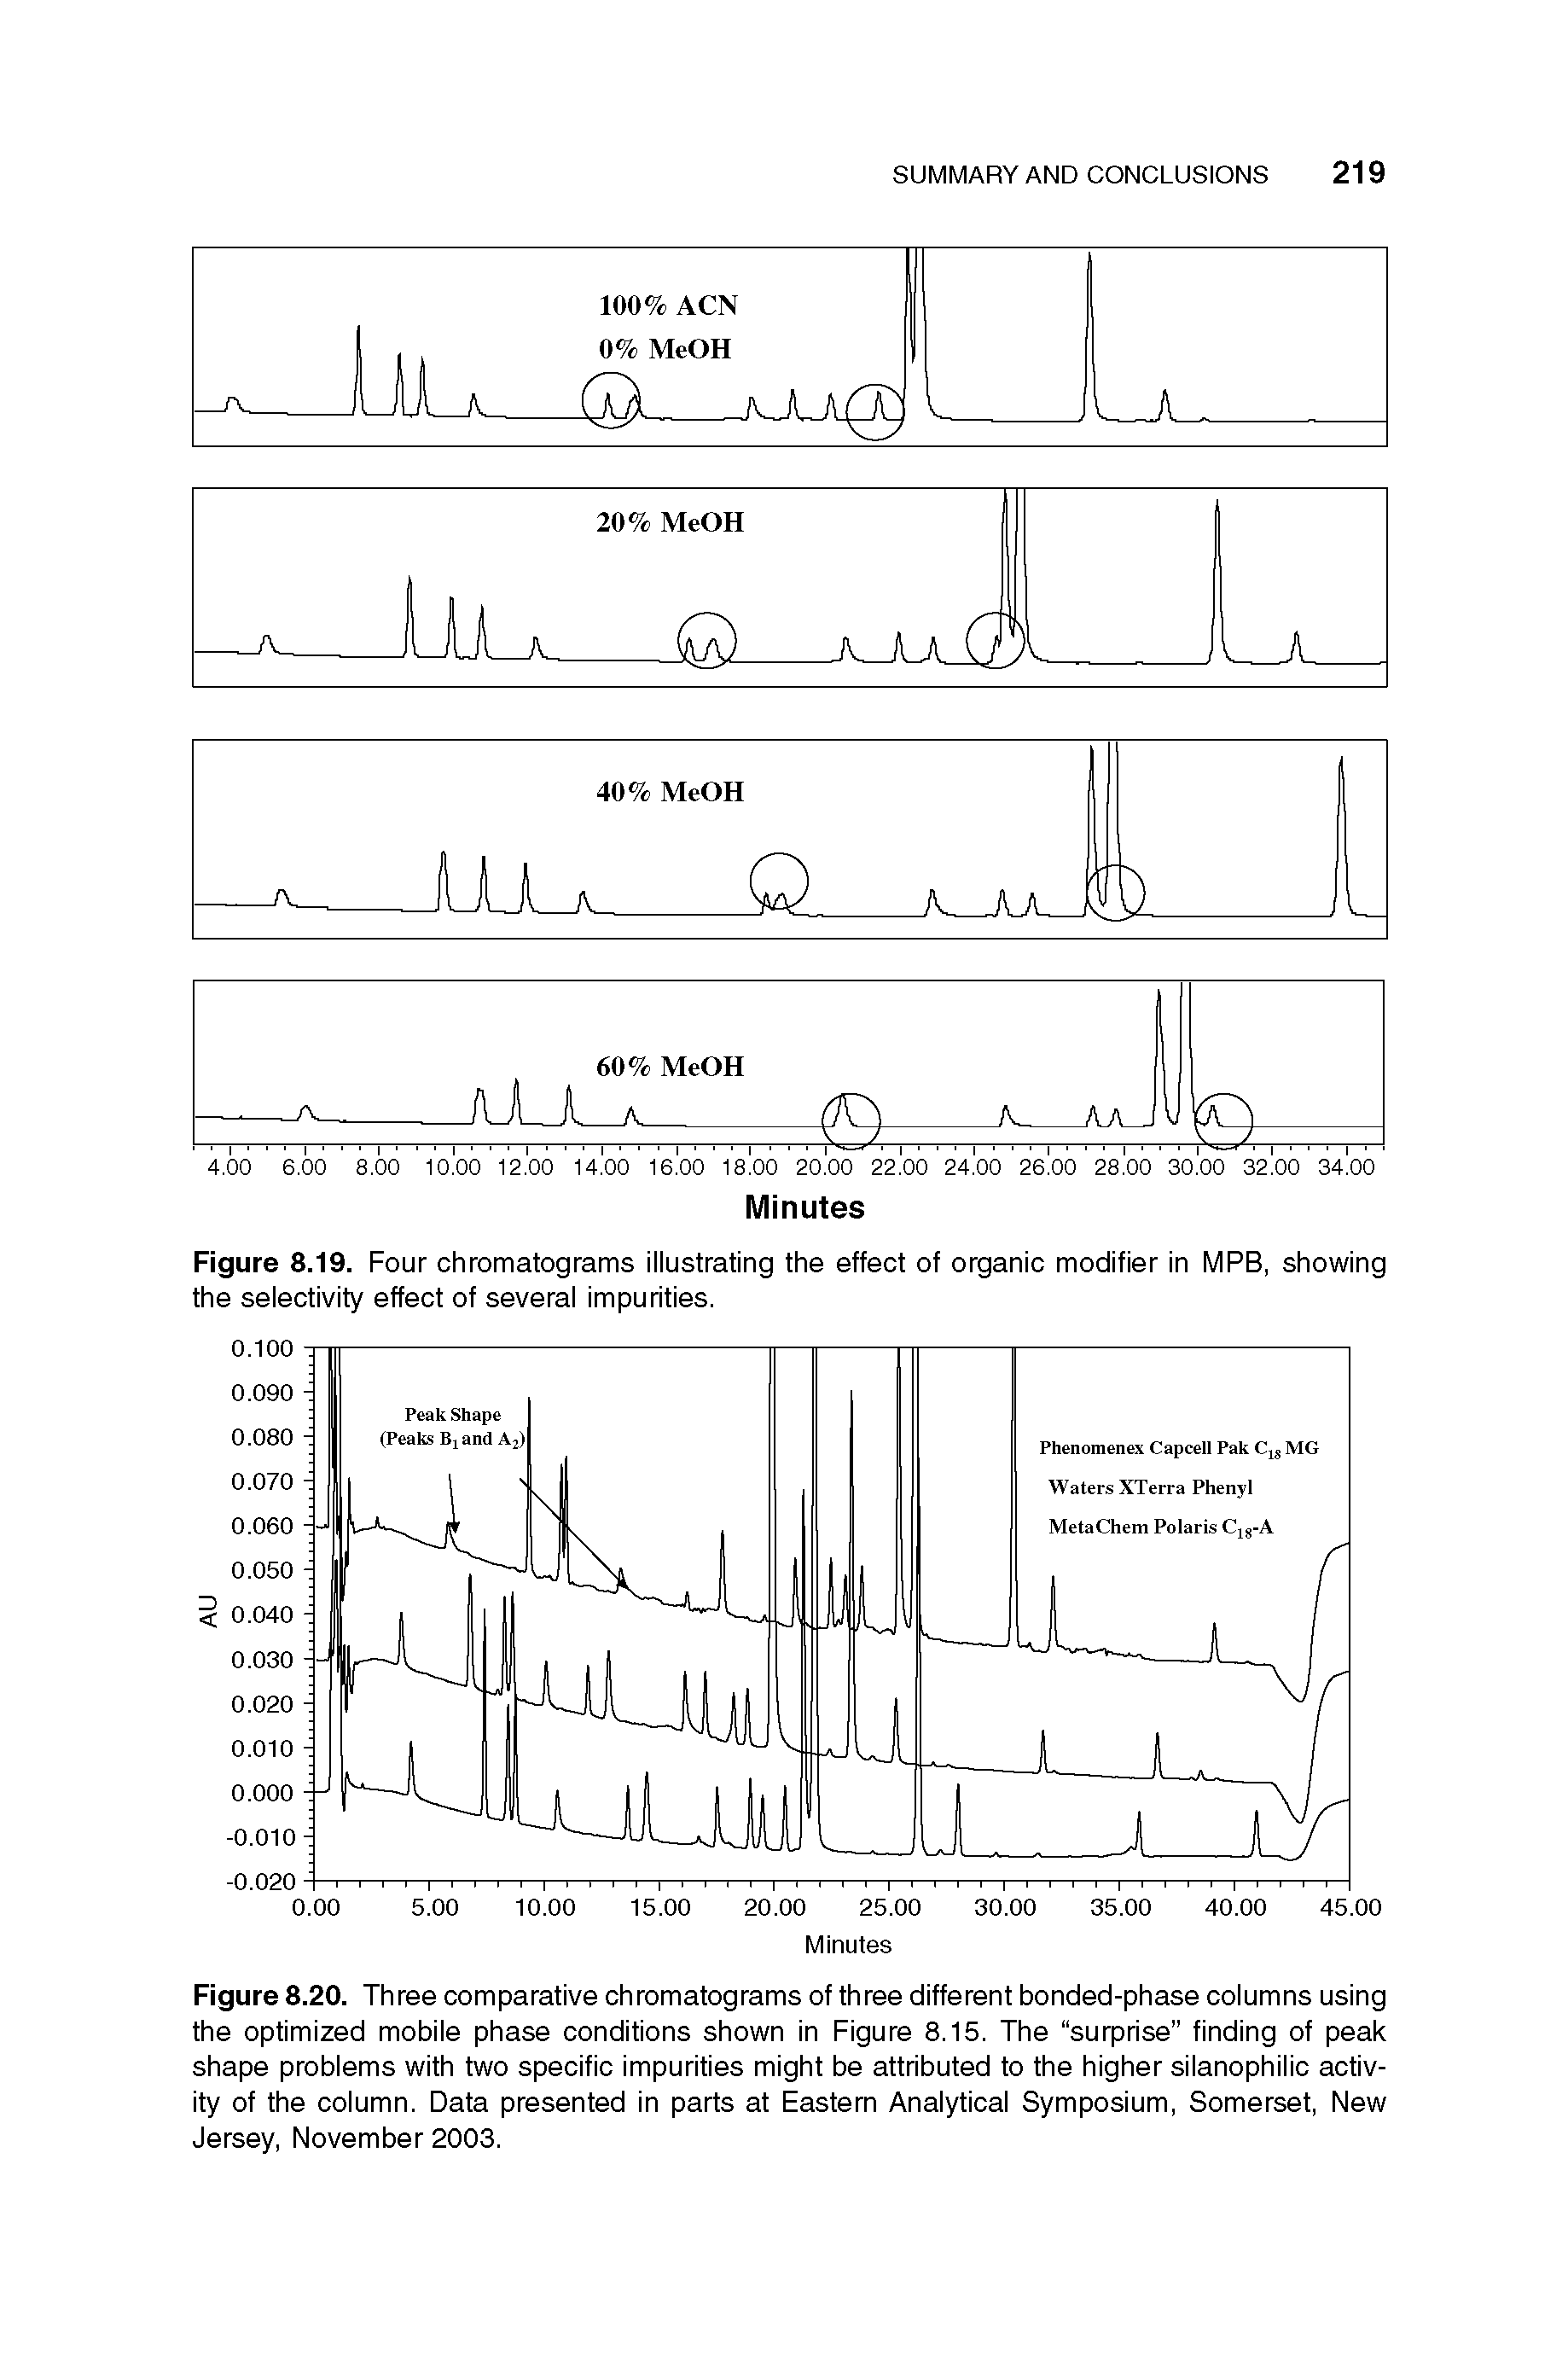 Figure 8.20. Three comparative chromatograms of three different bonded-phase columns using the optimized mobile phase conditions shown in Figure 8.15. The surprise finding of peak shape problems with two specific impurities might be attributed to the higher silanophilic activity of the column. Data presented in parts at Eastern Analytical Symposium, Somerset, New Jersey, November 2003.